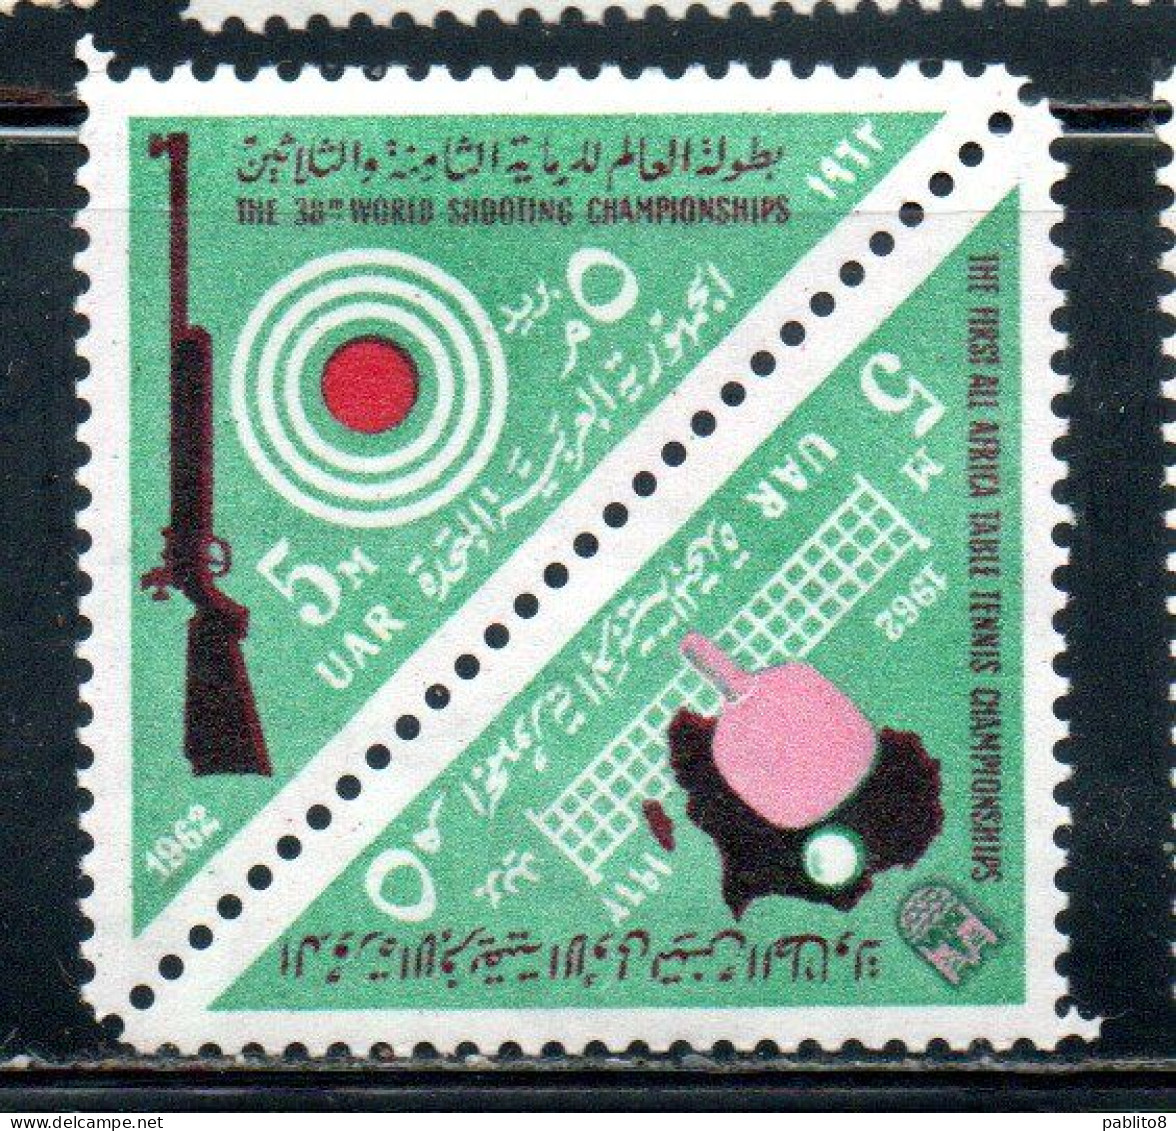 UAR EGYPT EGITTO 1962 WORLD SHOOTING CHAMPIONSHIPS AND AFRICAN TABLE TENNIS TOURNAMENT 5m MNH - Unused Stamps